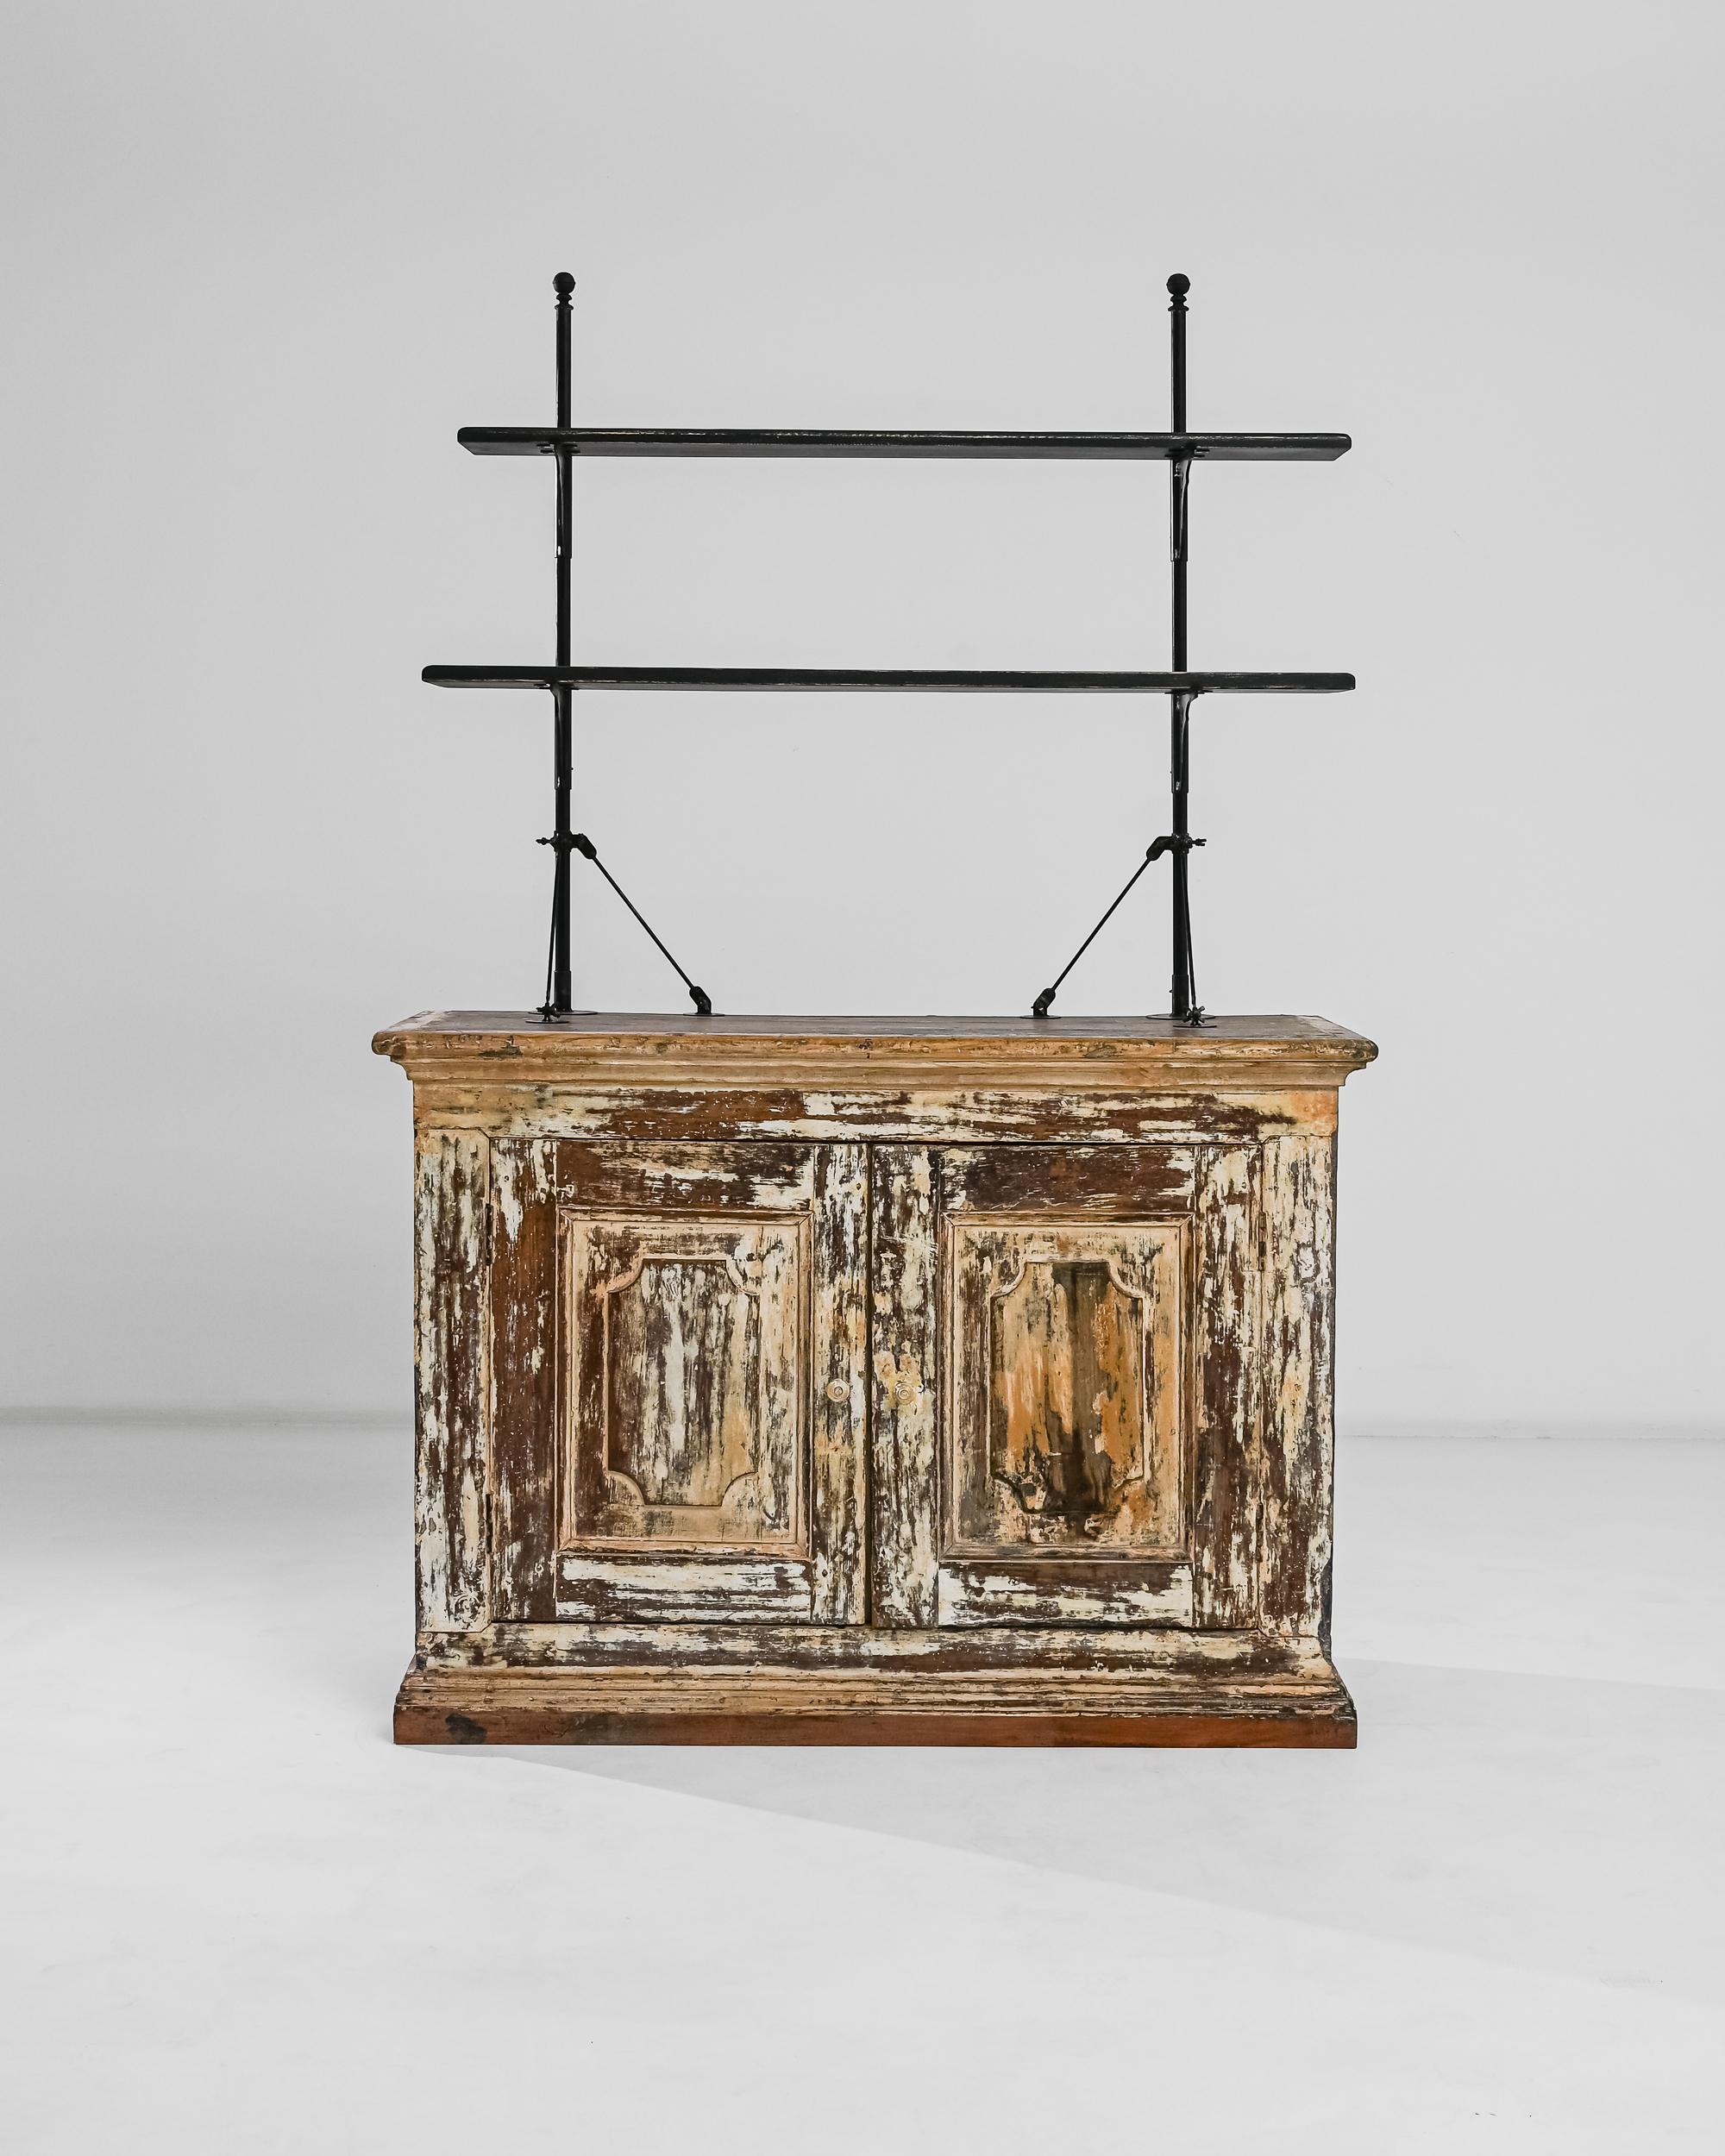 A 19th century wooden display cabinet from Portugal, this actualized cabinet is composed of two aerial shelves balanced on a double door country buffet. The structure allies the modernity of metal to the fine craftsmanship of the wood for an